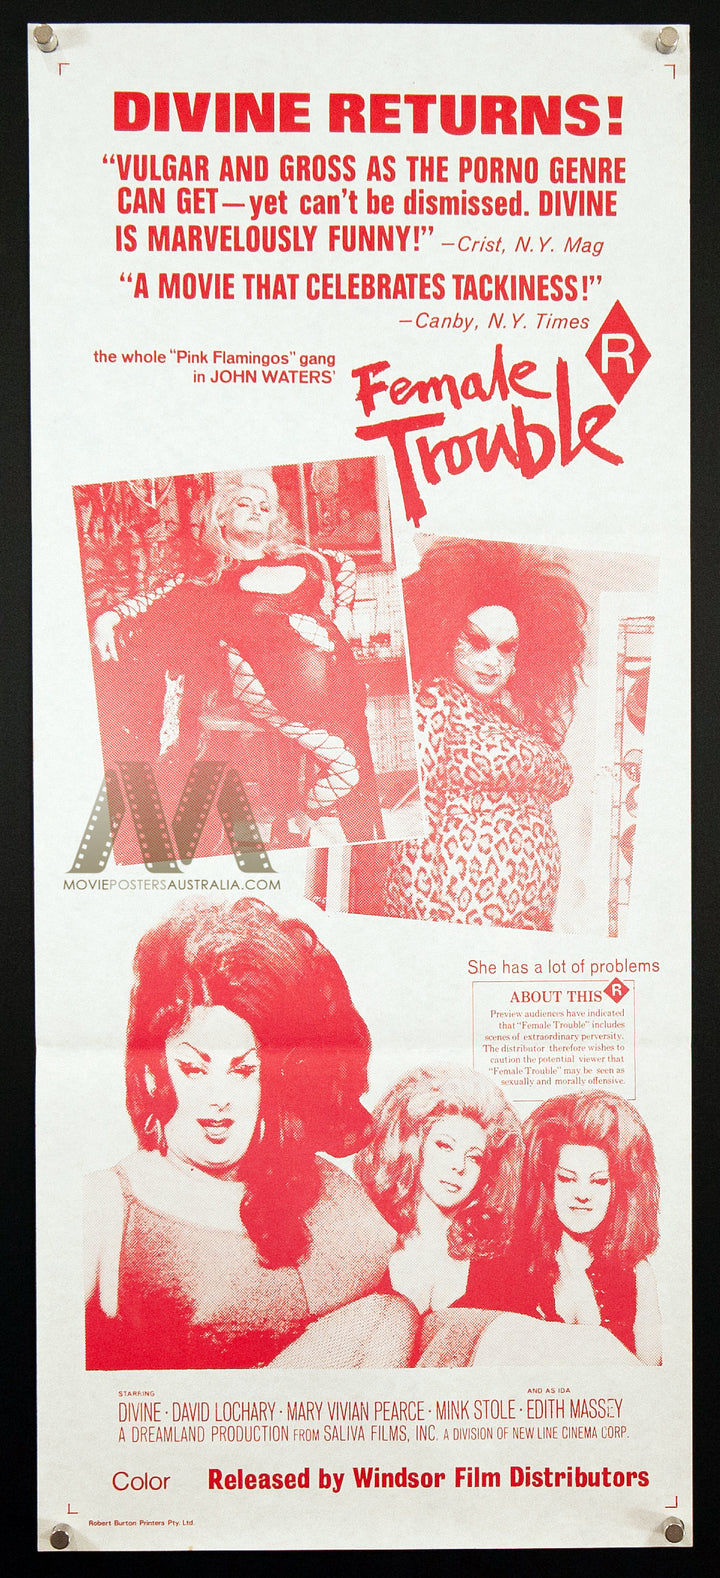 FEMALE TROUBLE (1974) Daybill Poster, John Waters, Divine, VERY RARE - Movie Posters Australia